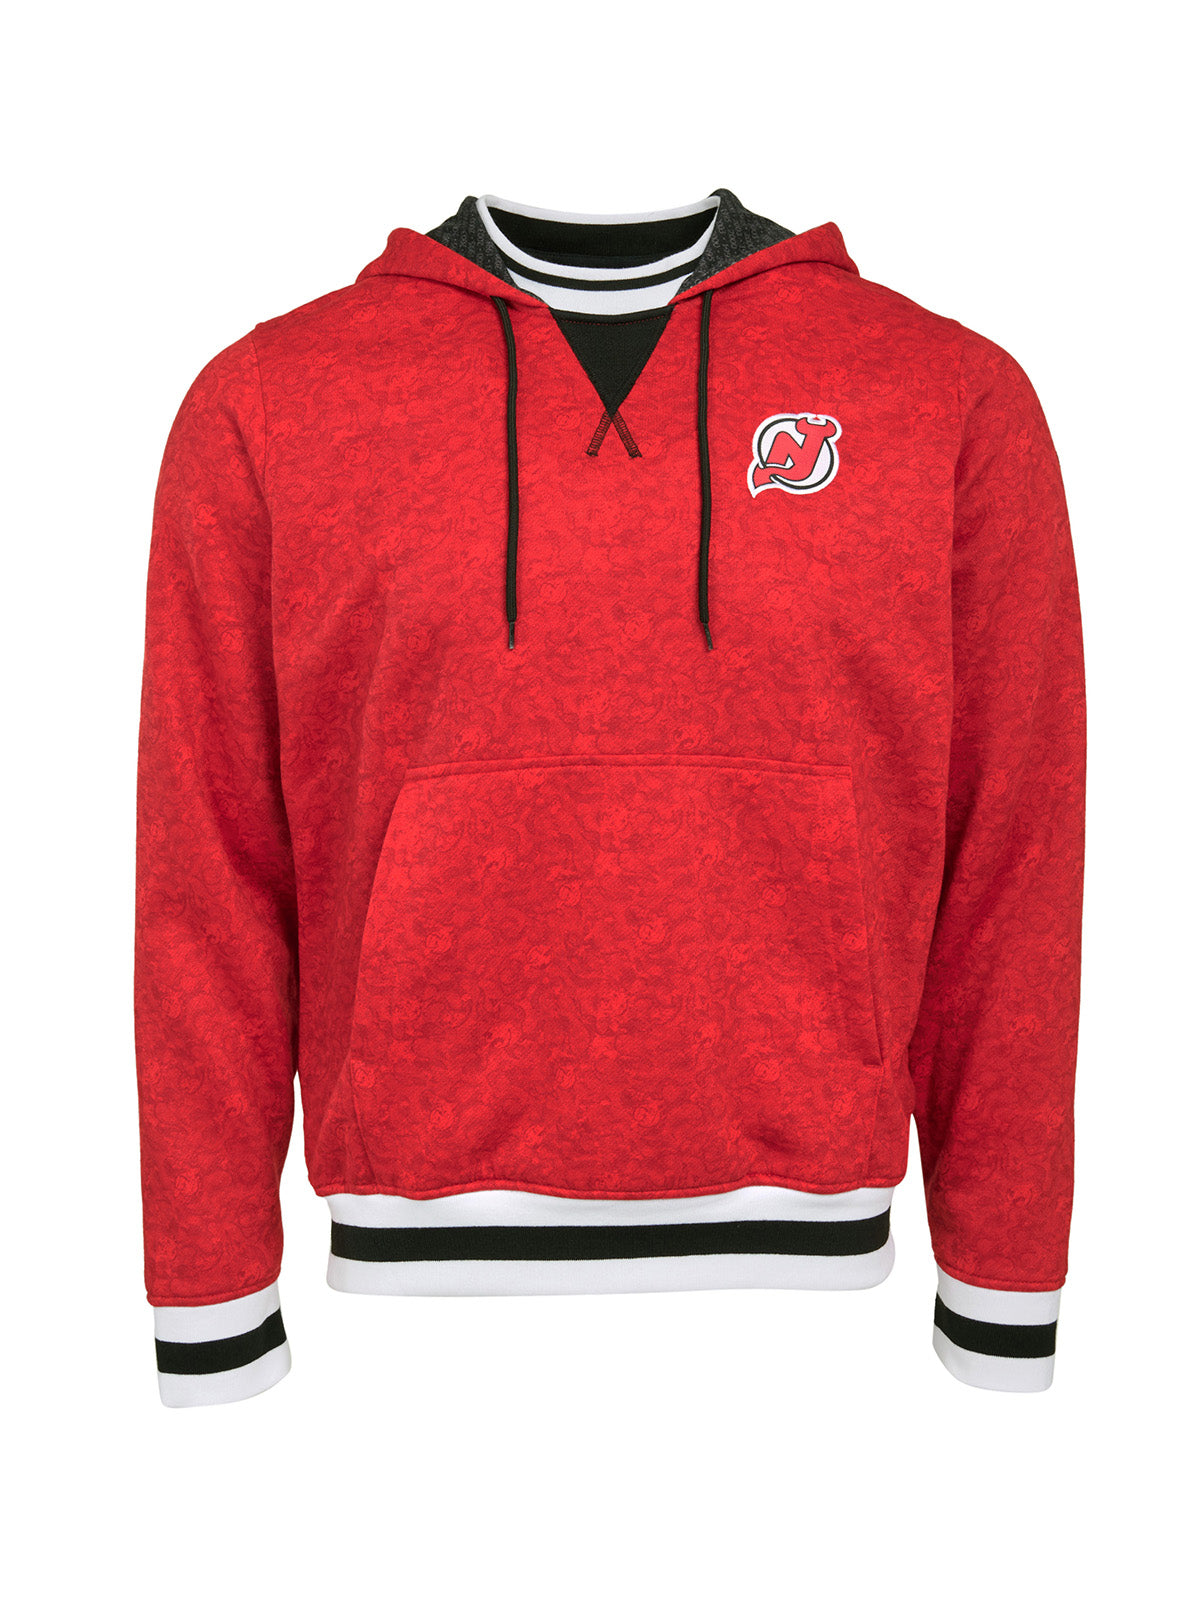 New Jersey Devils Hoodie - Show your team spirit, with the iconic team logo patch on the front left chest, and proudly display your New Jersey Devils support in their team colors with this NHL hockey hoodie.